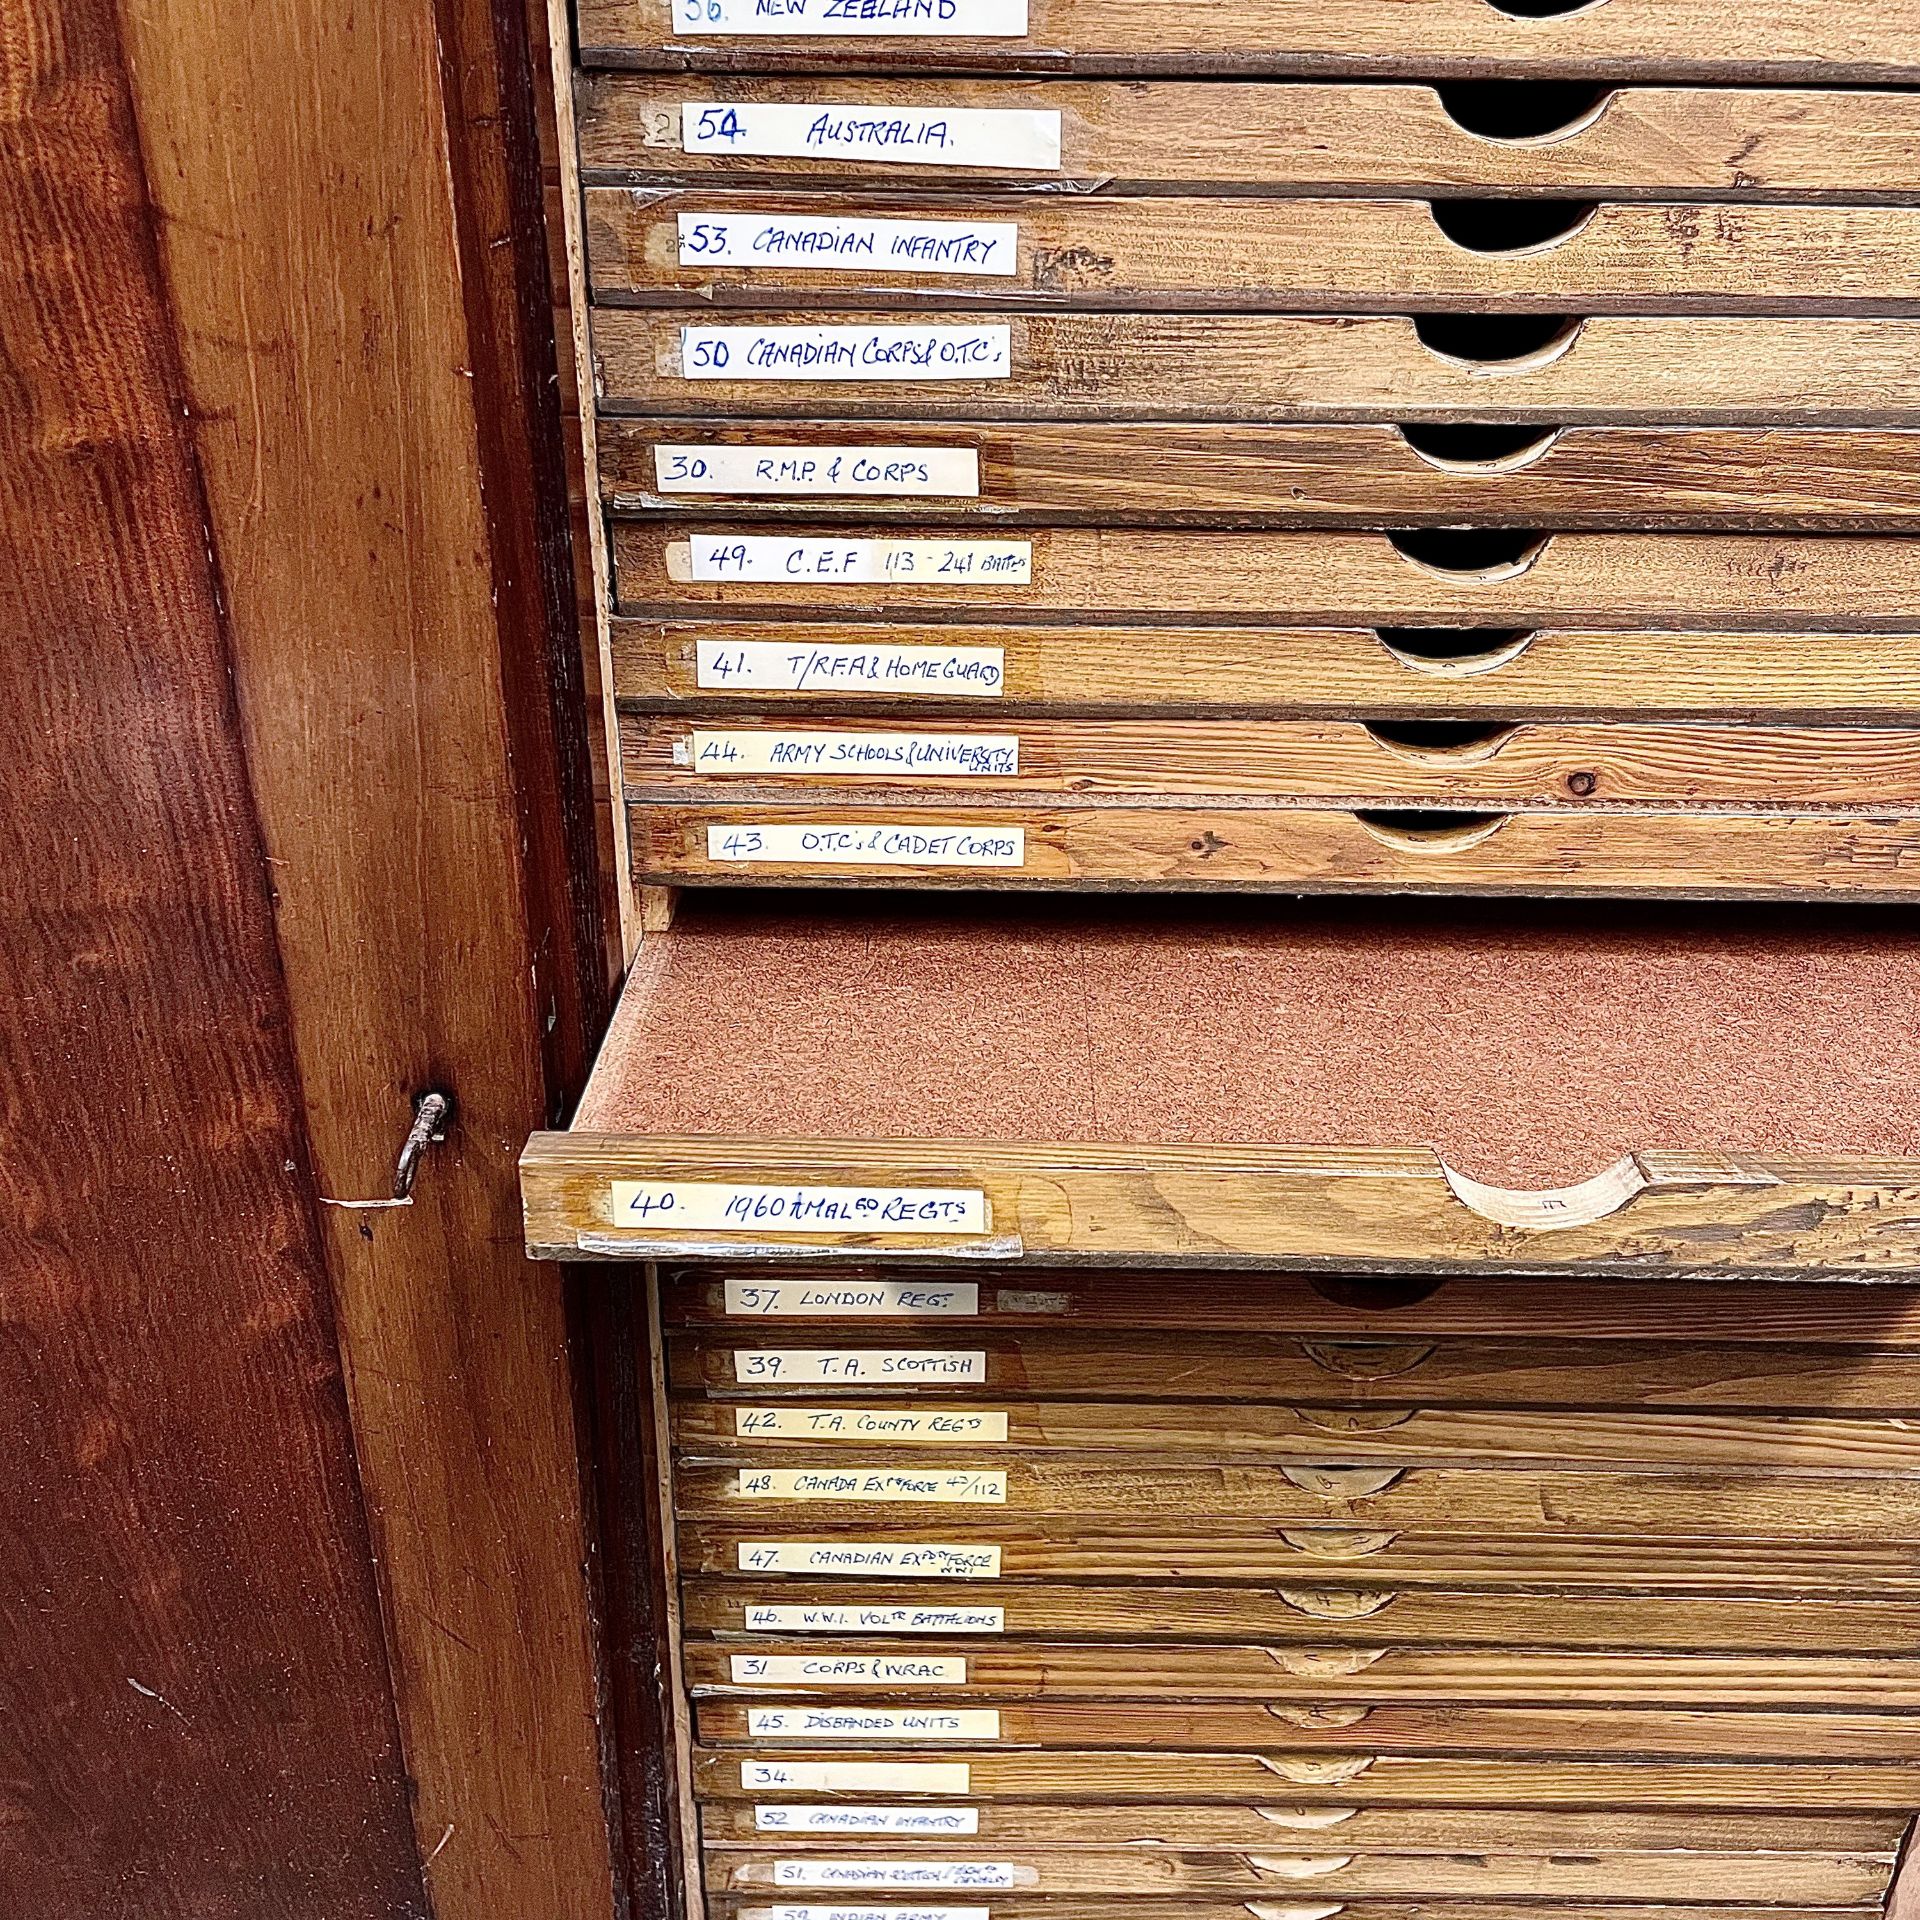 A collector's cabinet with 56 handmade drawers, ideal for displaying badges, buttons, coins etc. - Image 4 of 9